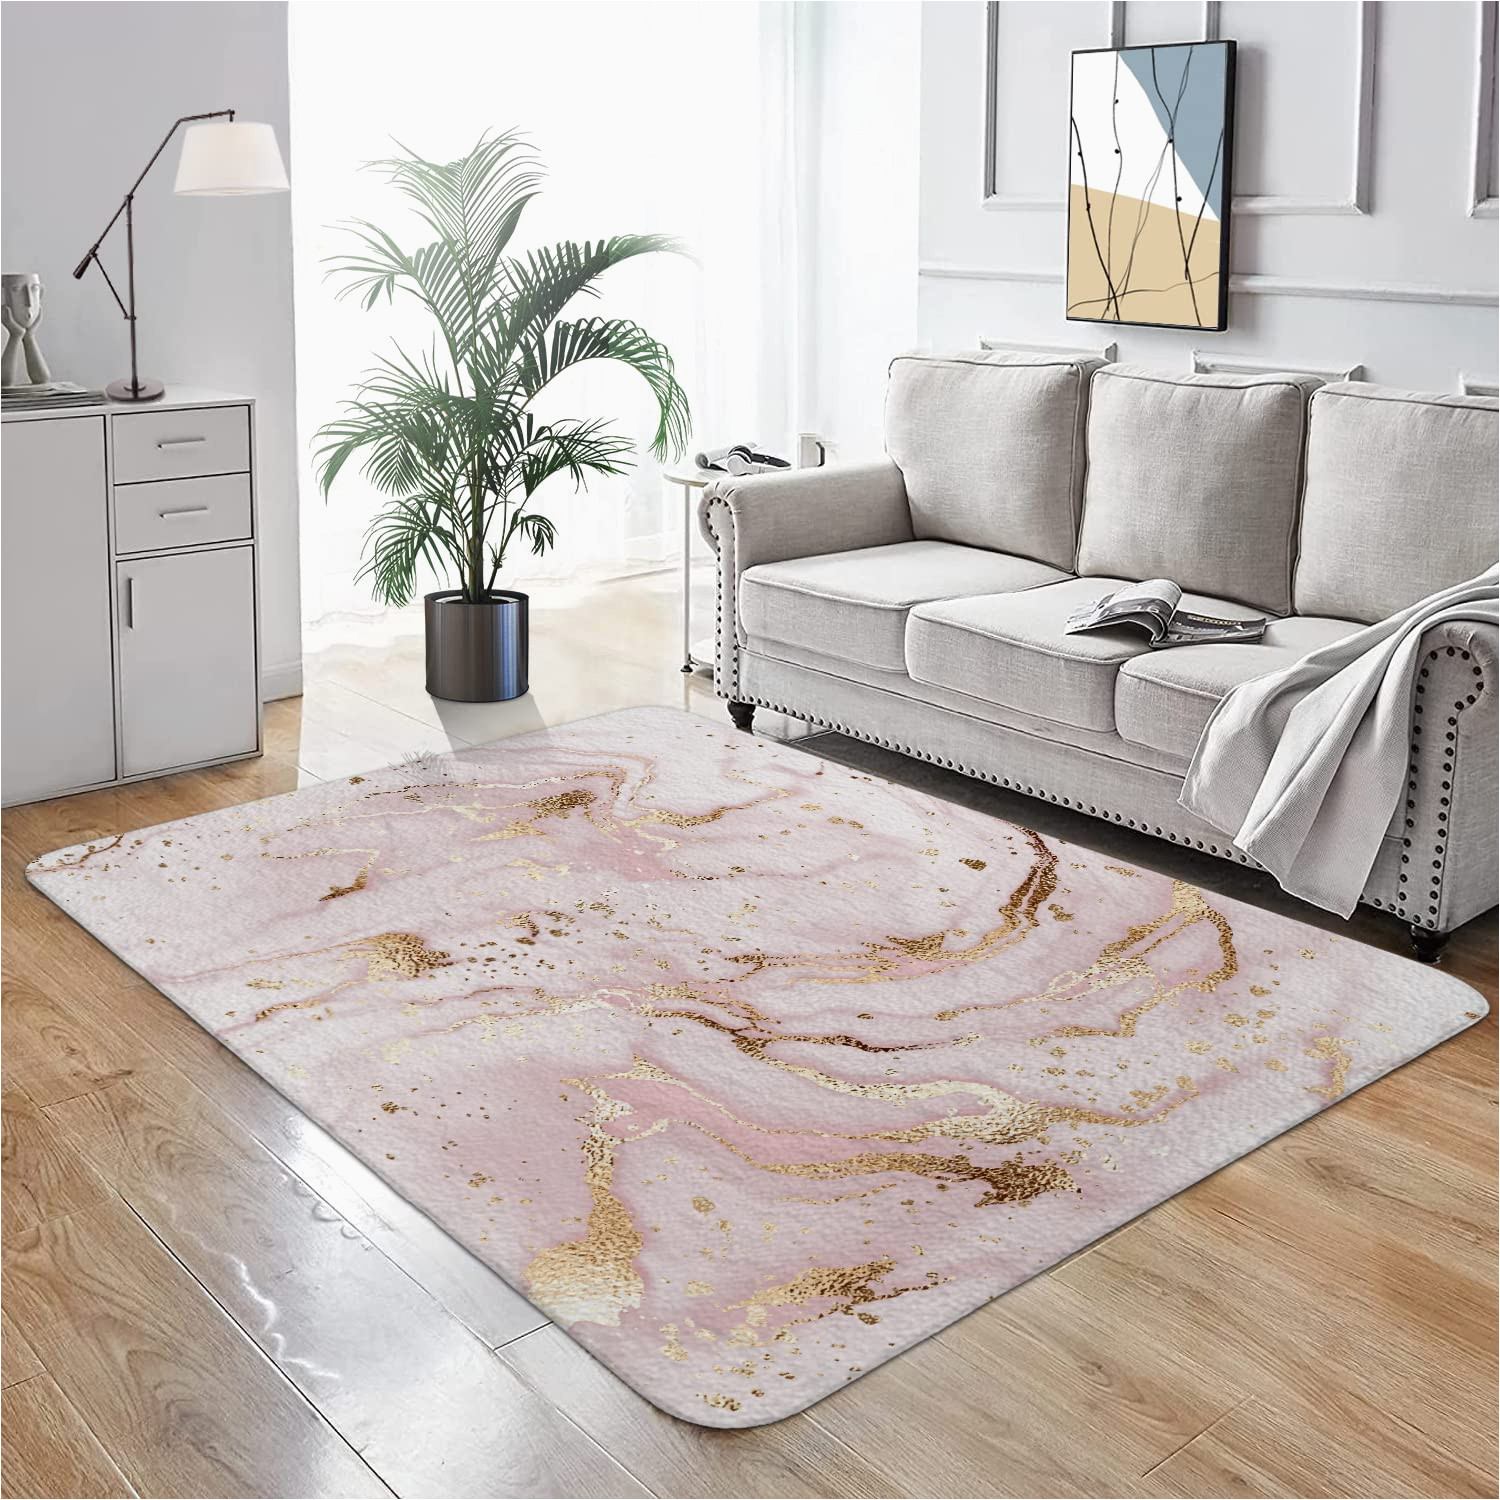 Area Rugs with Pink In them ormis Pink Marble area Rugs 4′ X 6′ Ultra soft Faux Wool area Rug Decorative Non-slip Throw Rugs Floor Carpet Cover for Living Room Bedrooms Decor